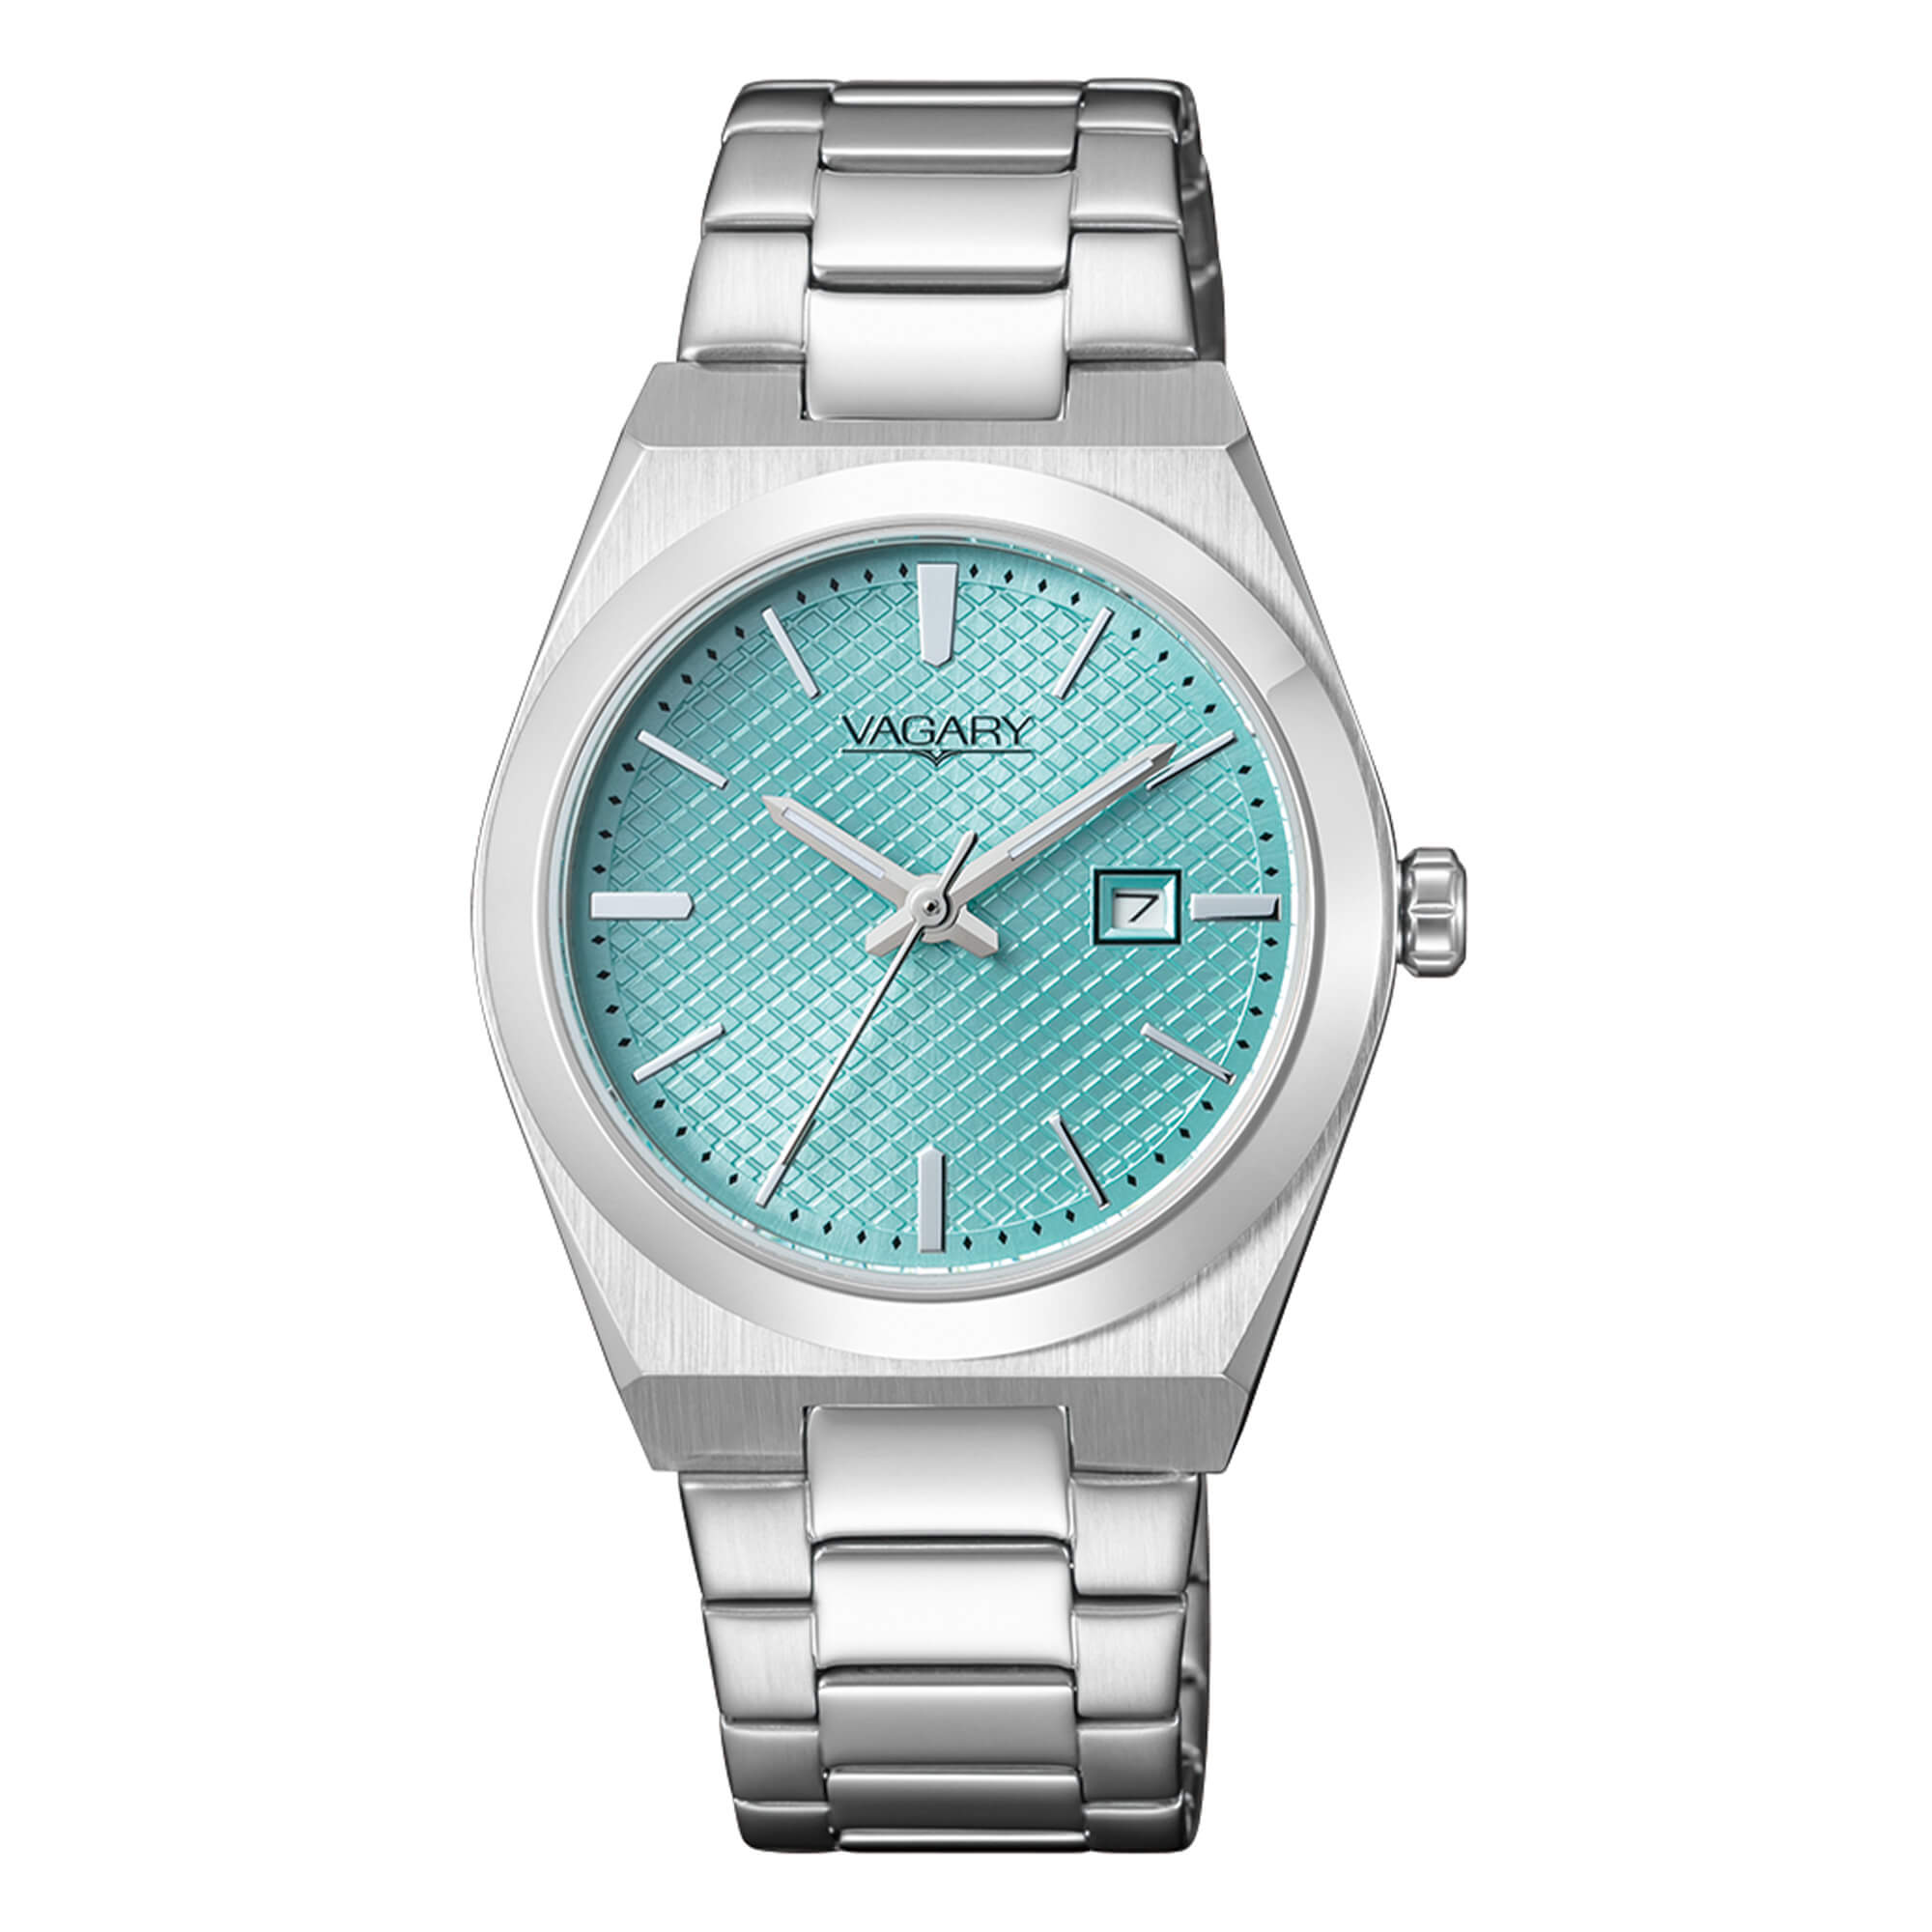 Vagary by Citizen, Timeless Lady, 32mm - IU3-118-73